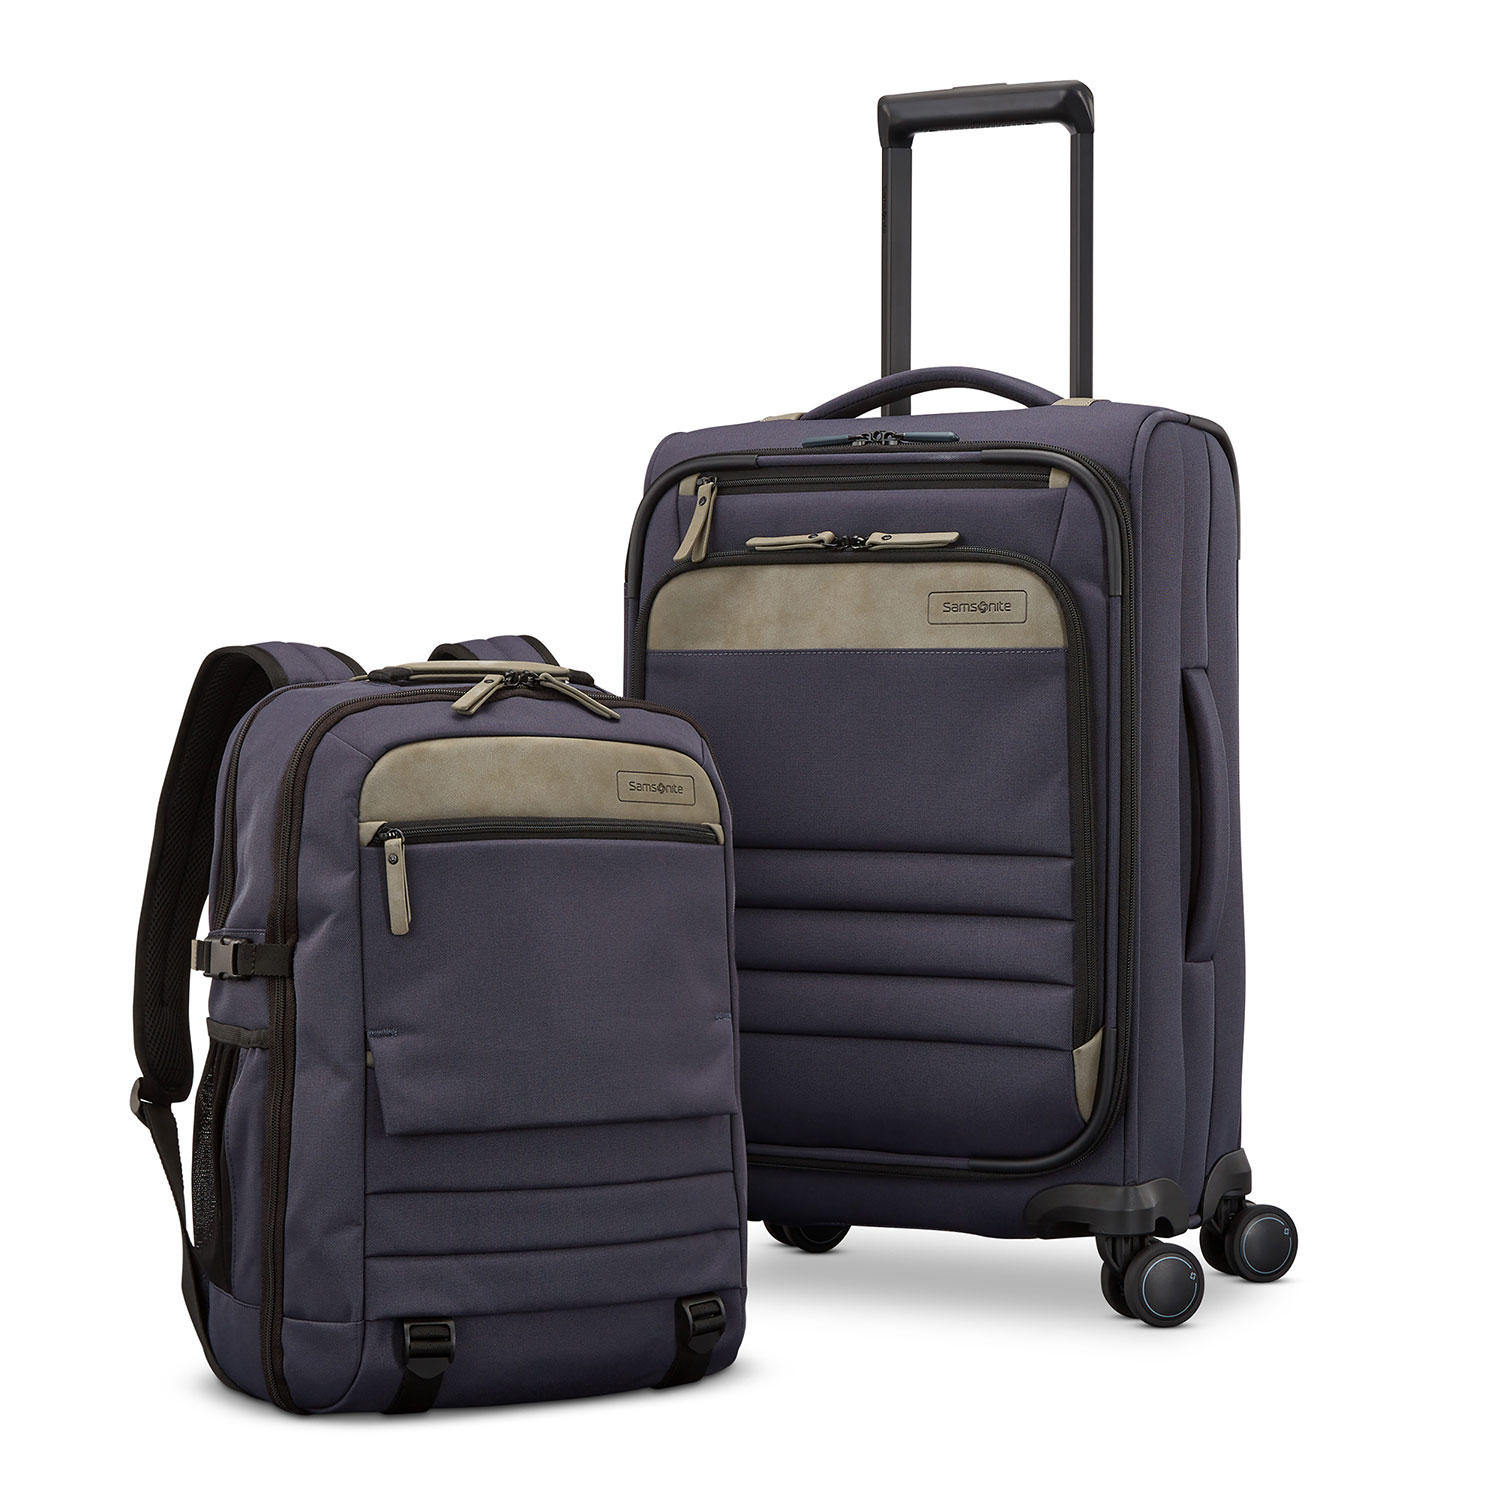 Samsonite Xpidition XLT 2pc Softside Carry-On and Backpack Set